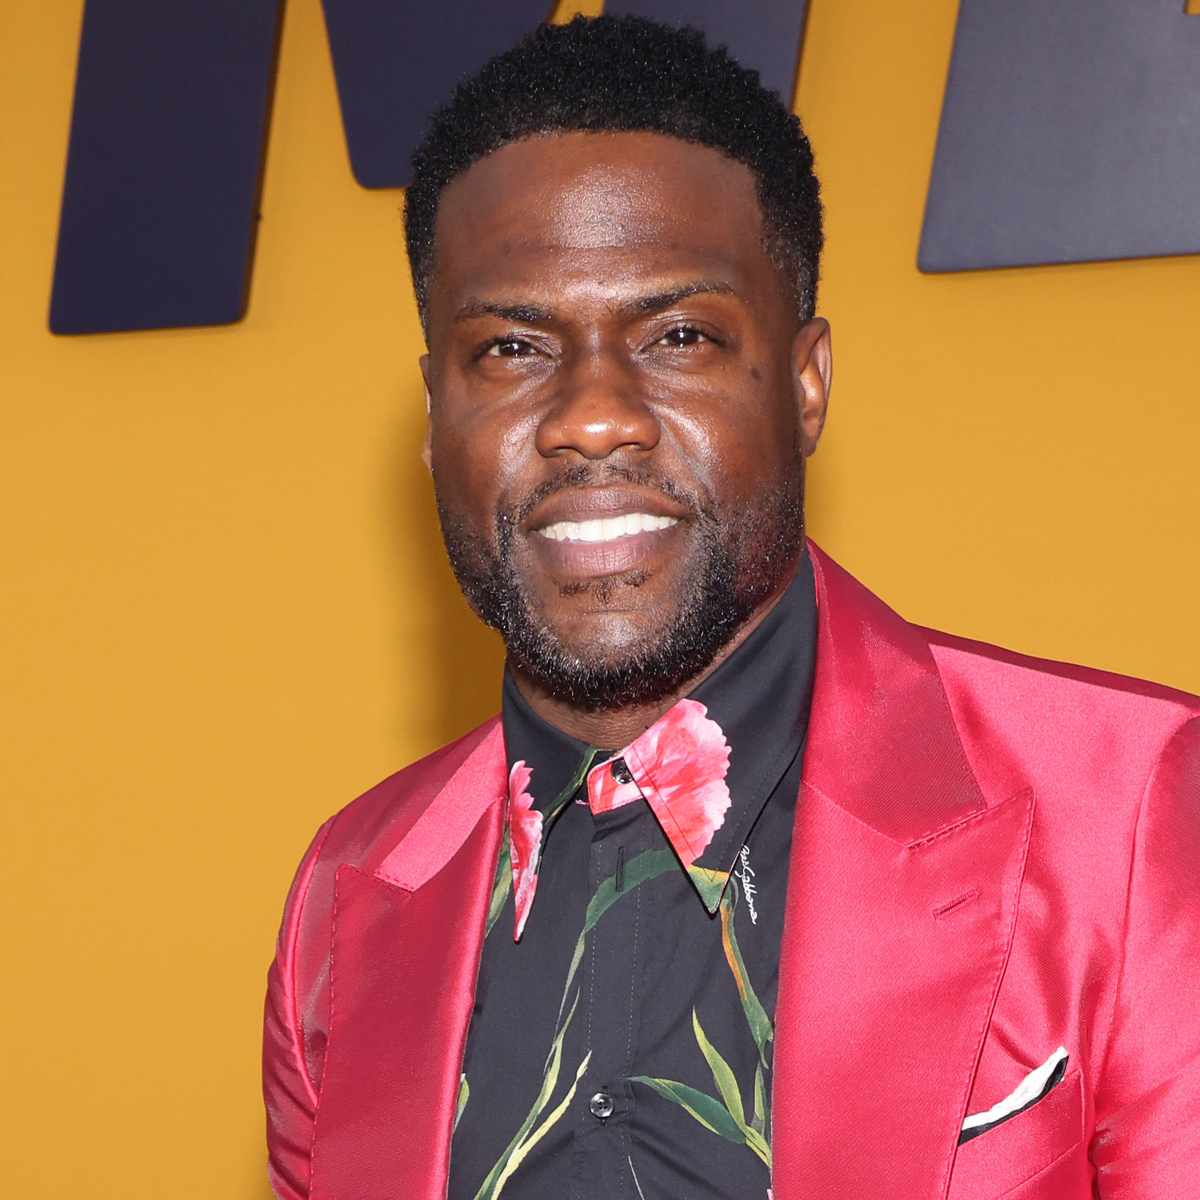 Kevin Hart Compares His Manhood to a Thumb After “F–king Bad” Injury